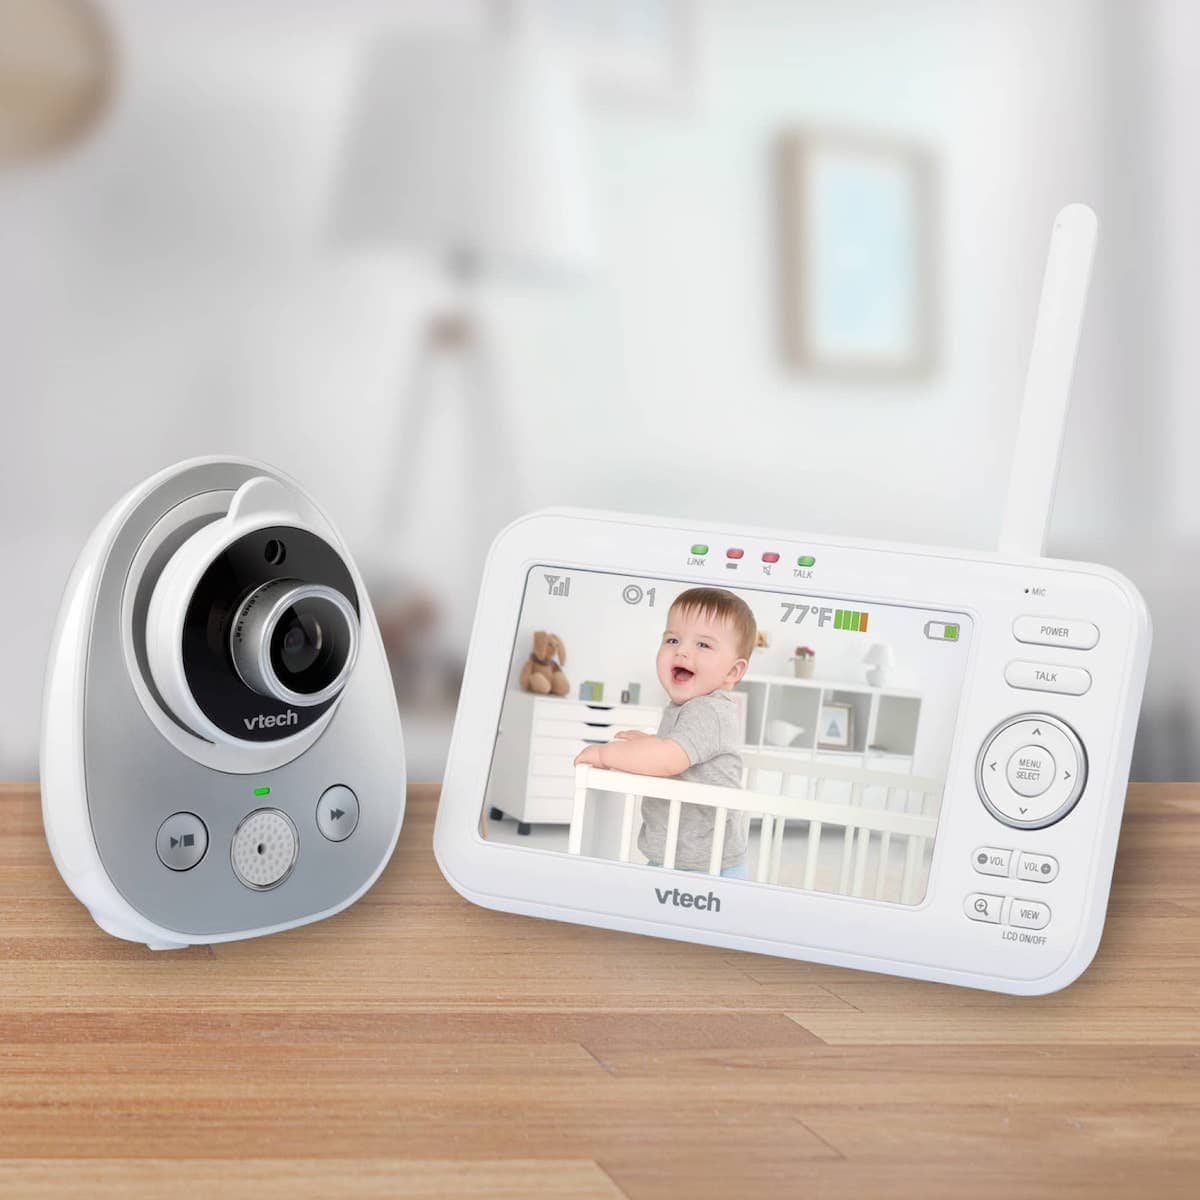 VTech VM981 Safe & Sound Expandable HD Video Baby Monitor review